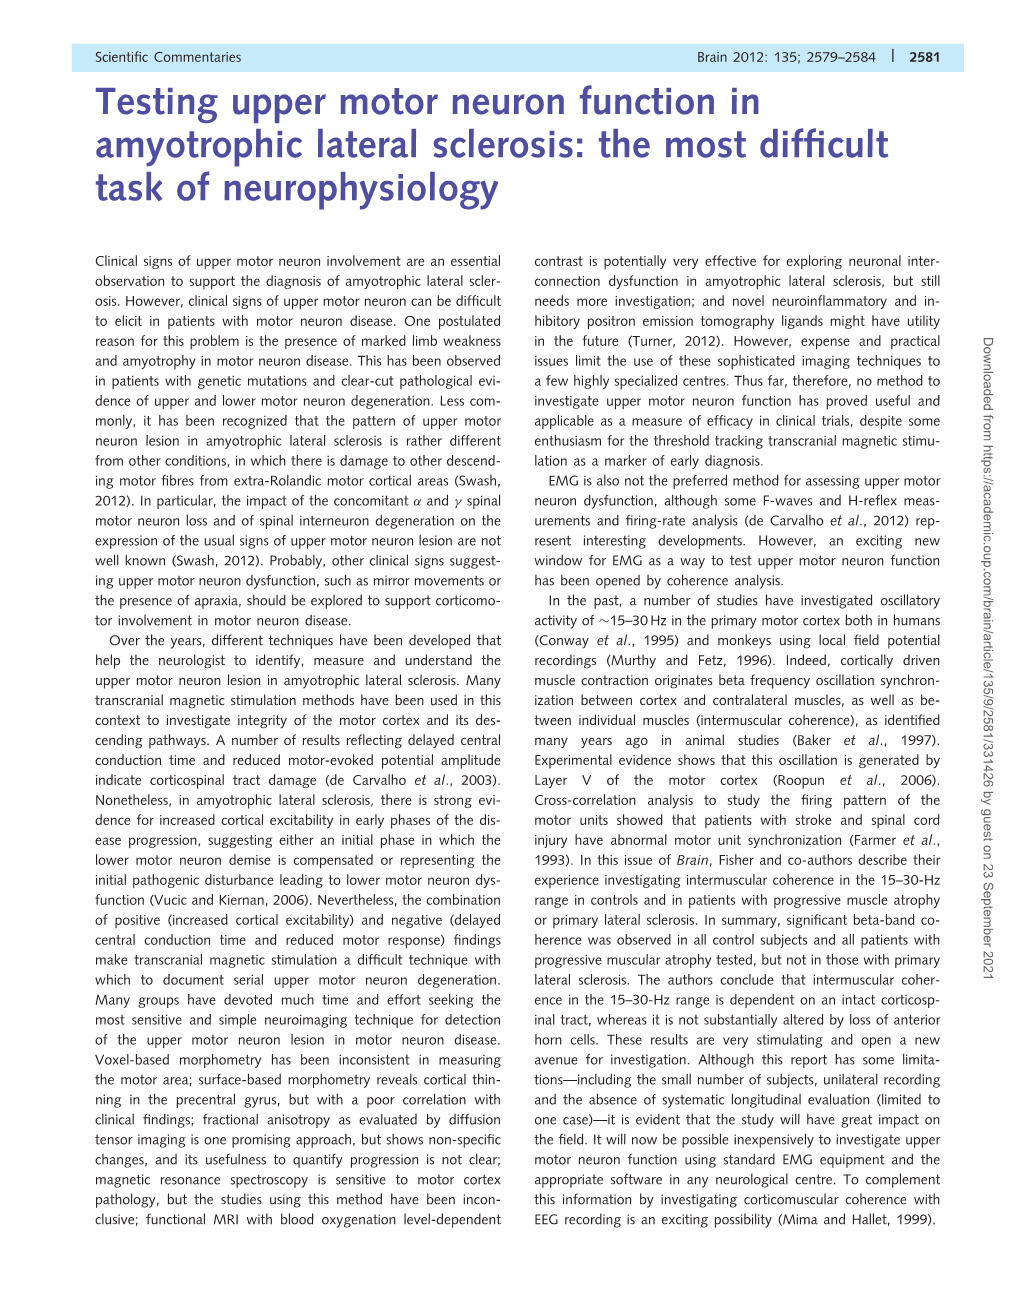 Testing Upper Motor Neuron Function in Amyotrophic Lateral Sclerosis: the Most Difﬁcult Task of Neurophysiology